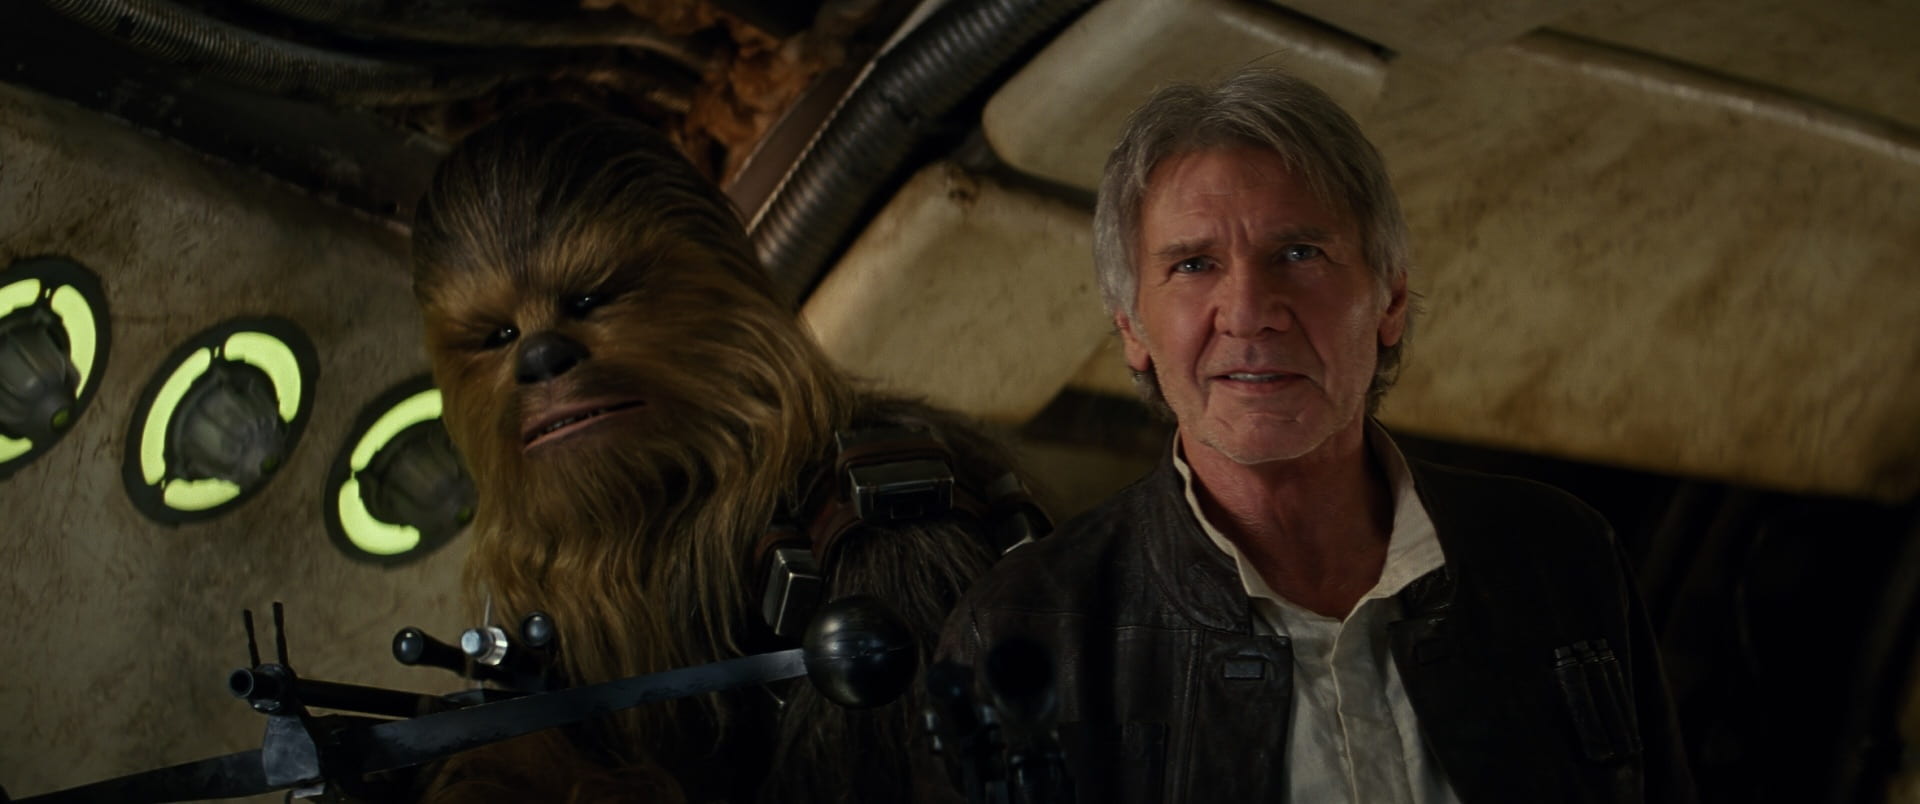 Han and Chewie in Star Wars - Episode VII: The Force Awakens